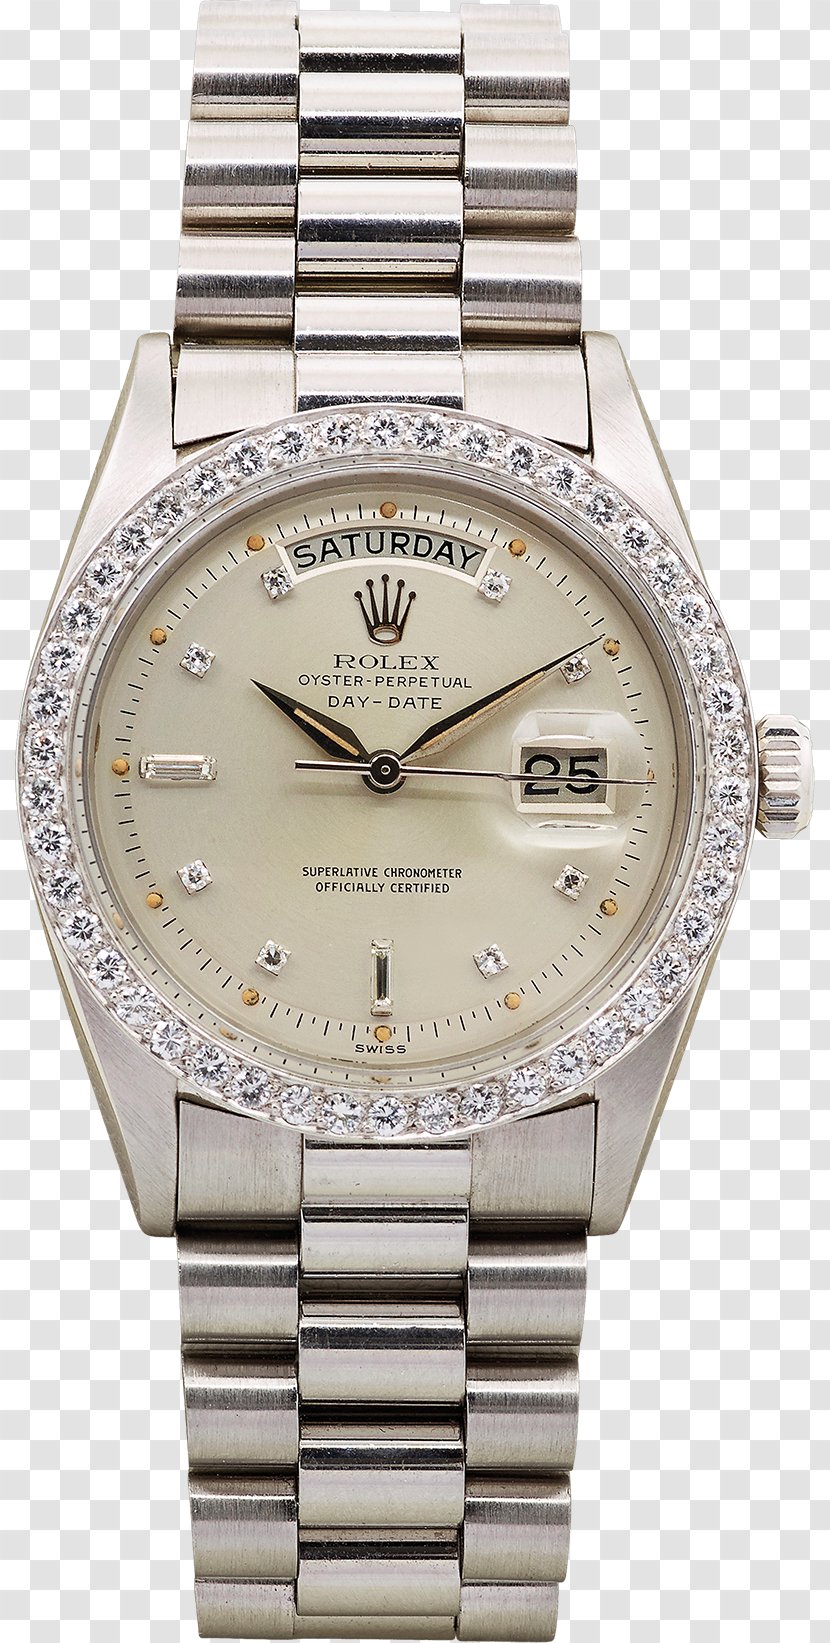 Rolex Datejust GMT Master II Watch Day-Date Transparent PNG